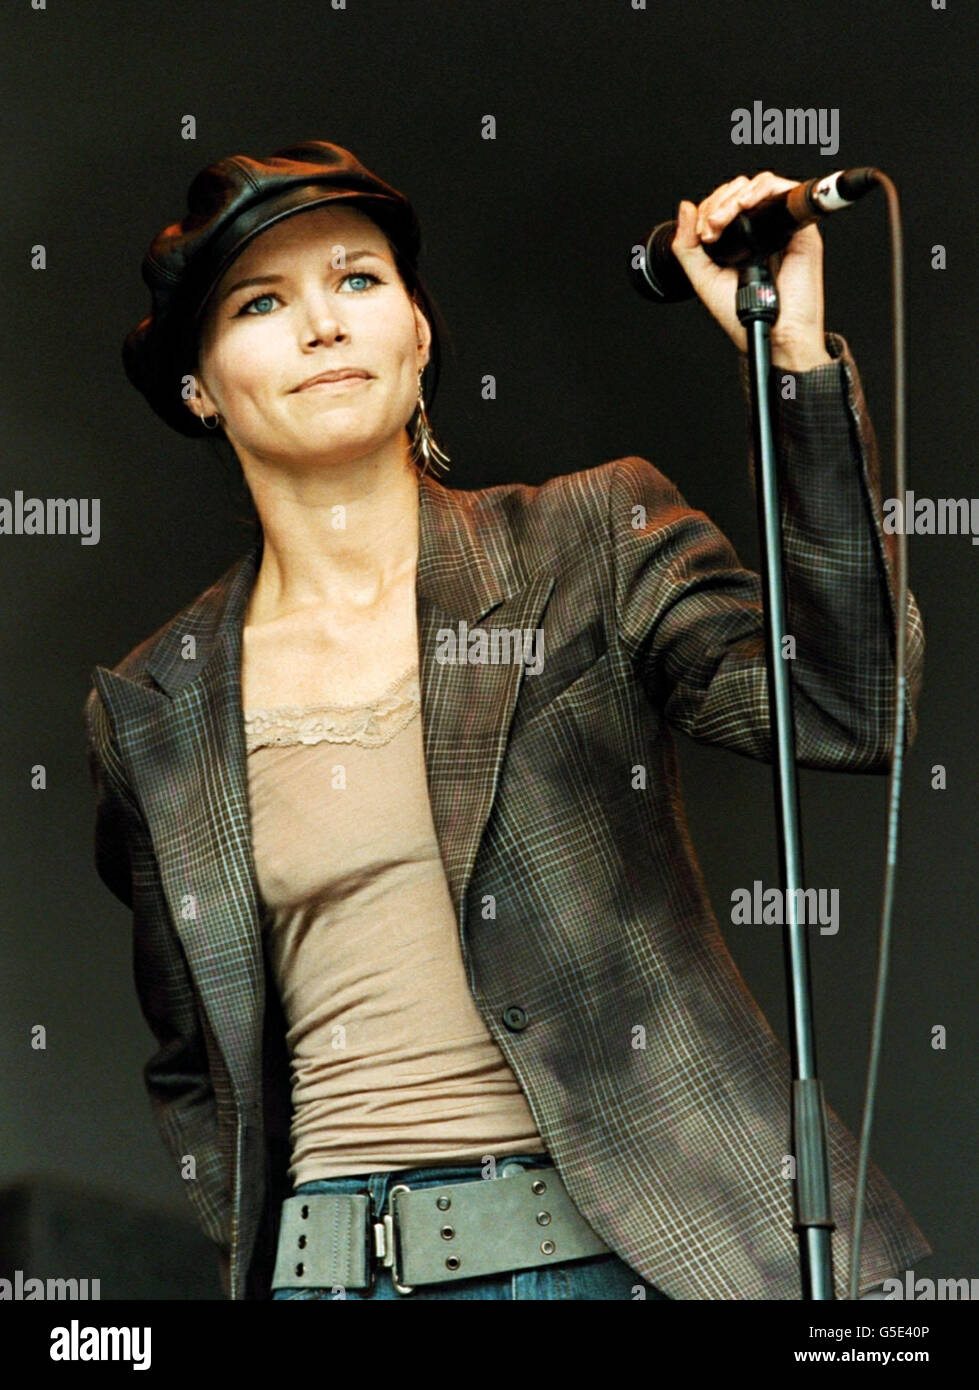 Singer Nina Persson, of The Cardigans, performing with her new group 'A  Camp', at the V2001 concert in Hylands Park, Chelmsford, Essex. Acts such  as rock outfit Red Hot Chili Peppers, Texas,